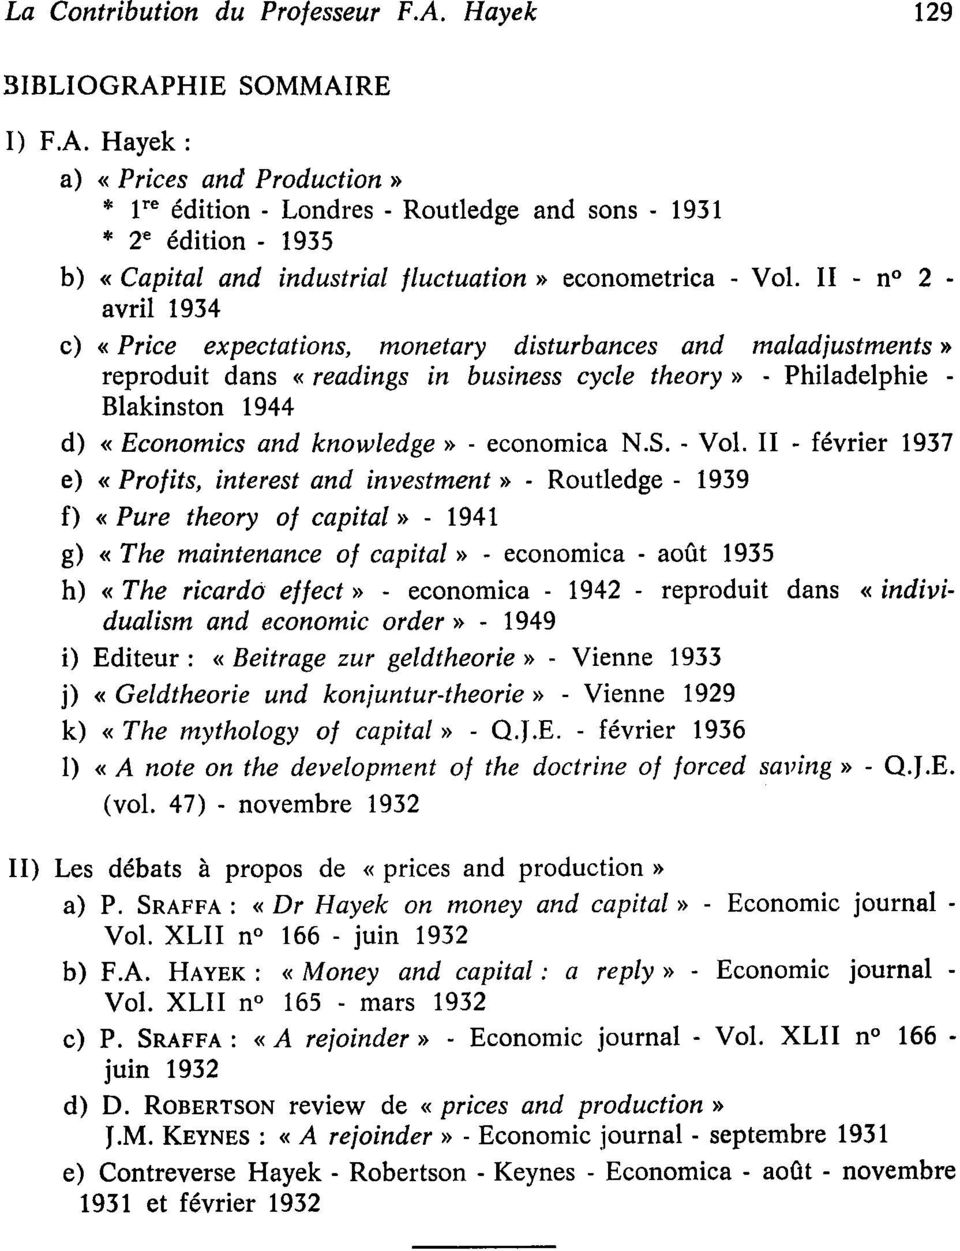 li - n" 2 - avril 1934 c) < Price expectations, monetary disturbances and maladjustments > reproduit dans << readings in business cycle theory > - Philadelphie - Blakinston 1944 d) << Economics and